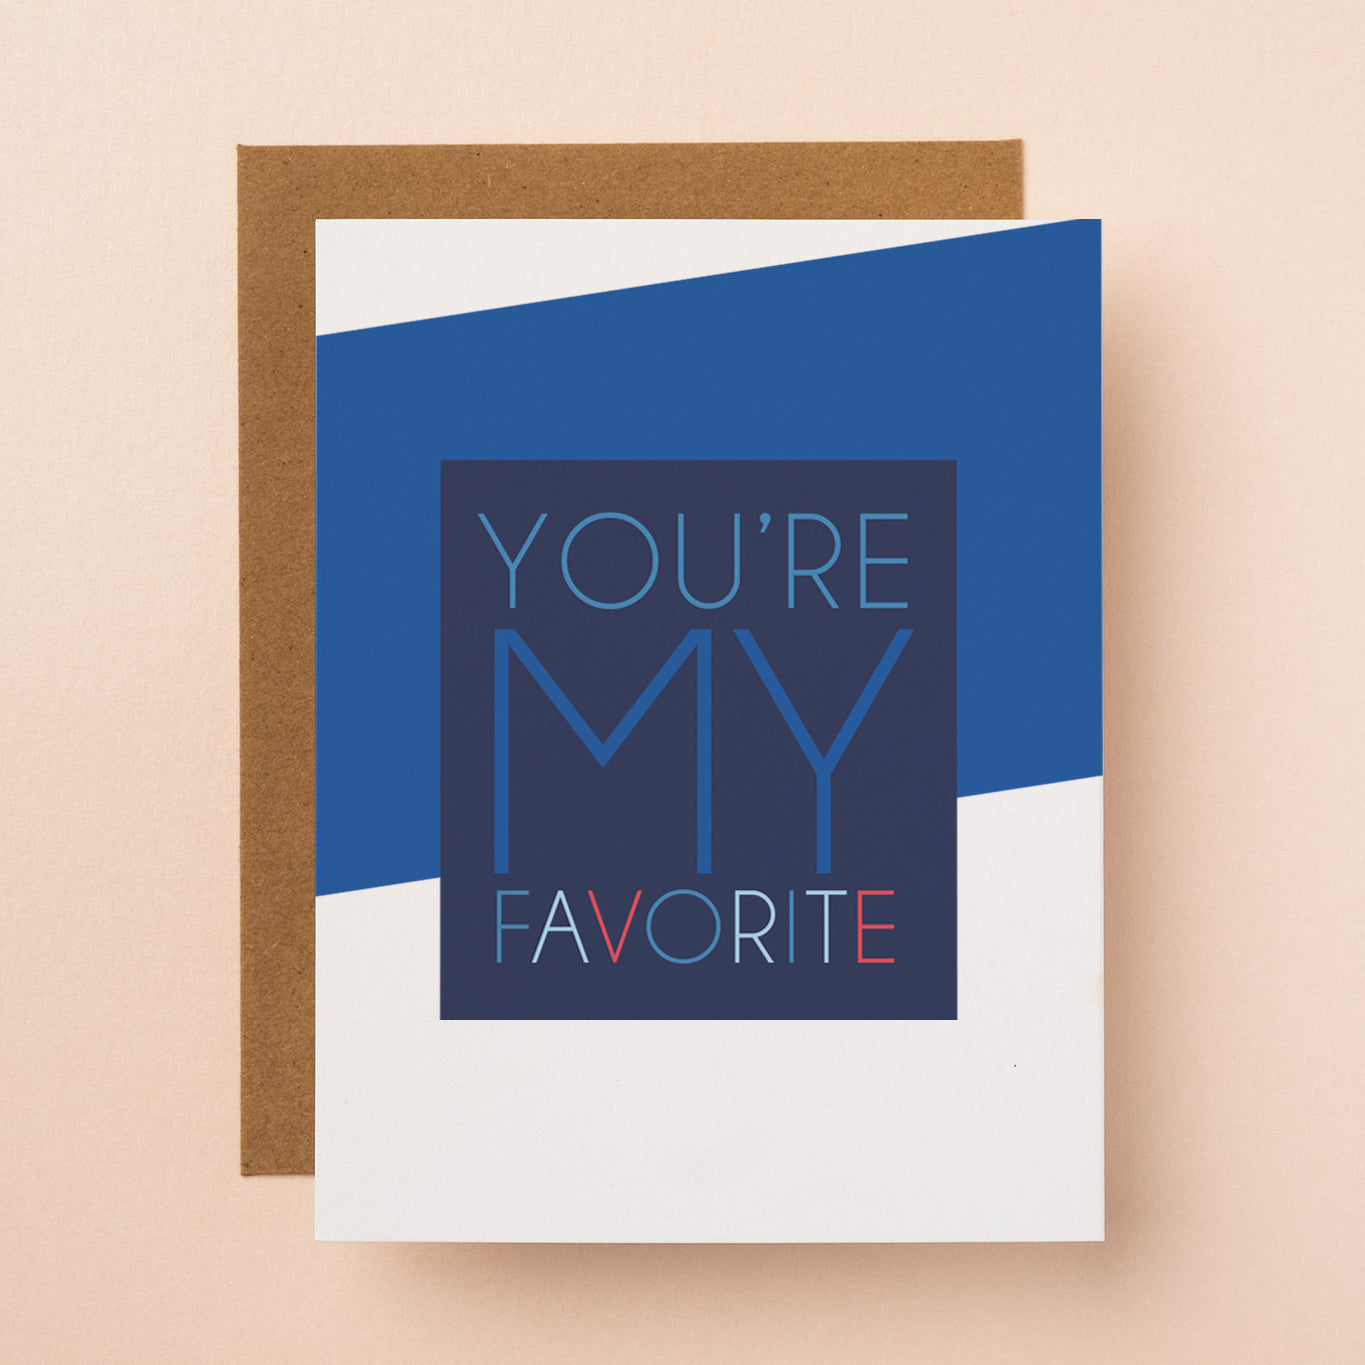 A funny and cute greeting card that reads "You're my favorite."